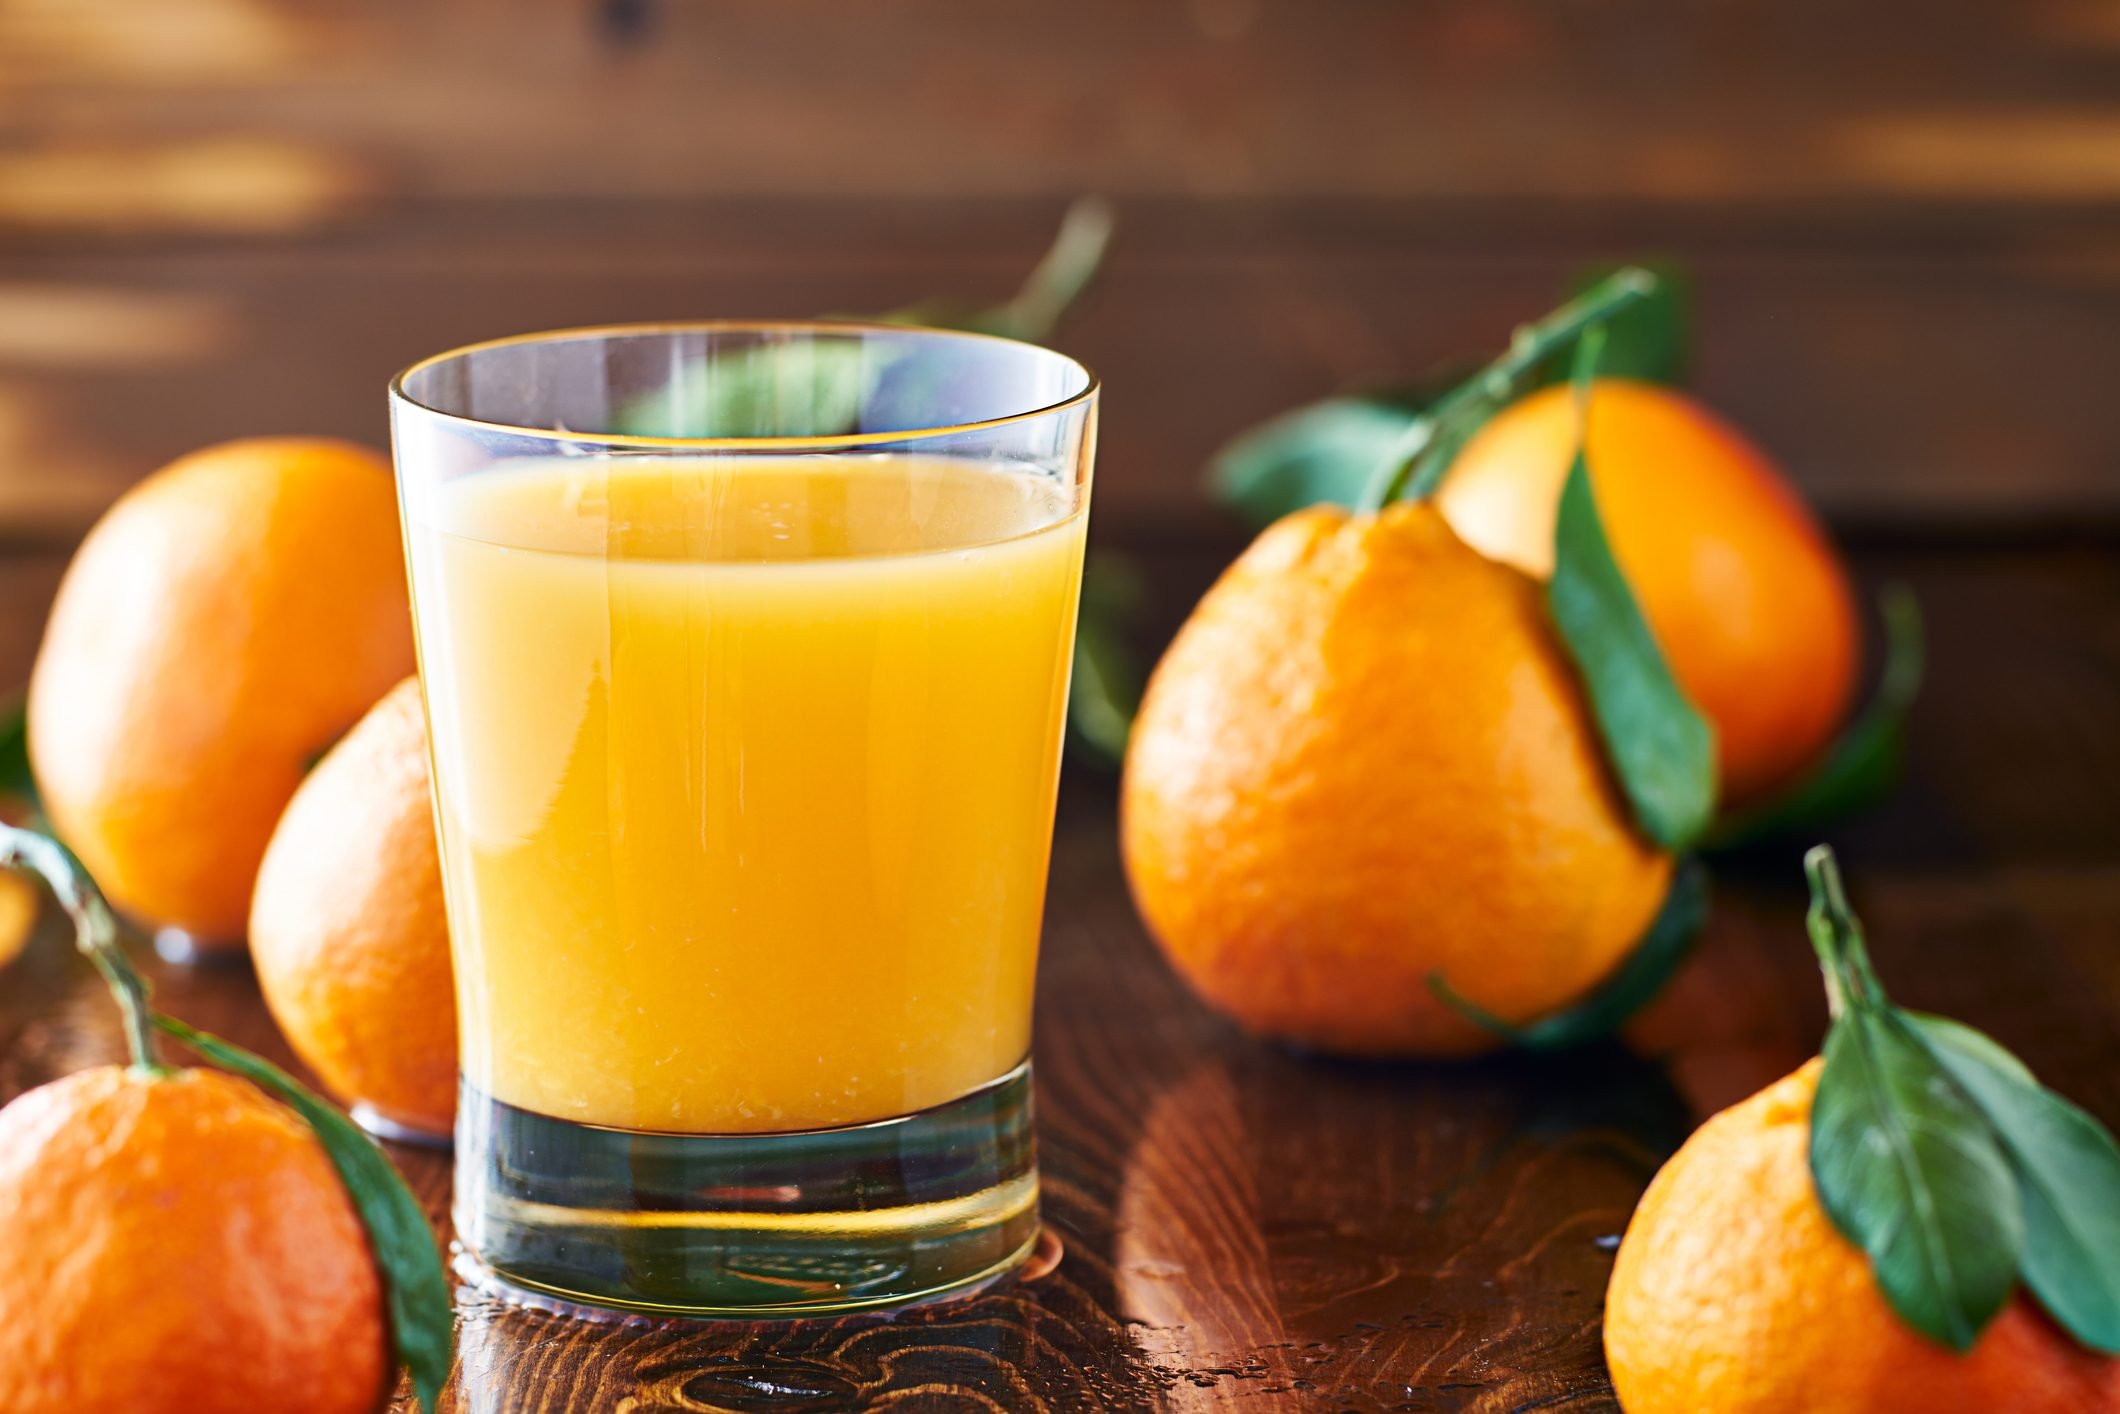 7 Fruit Juices That Are Healthier Than You Thought